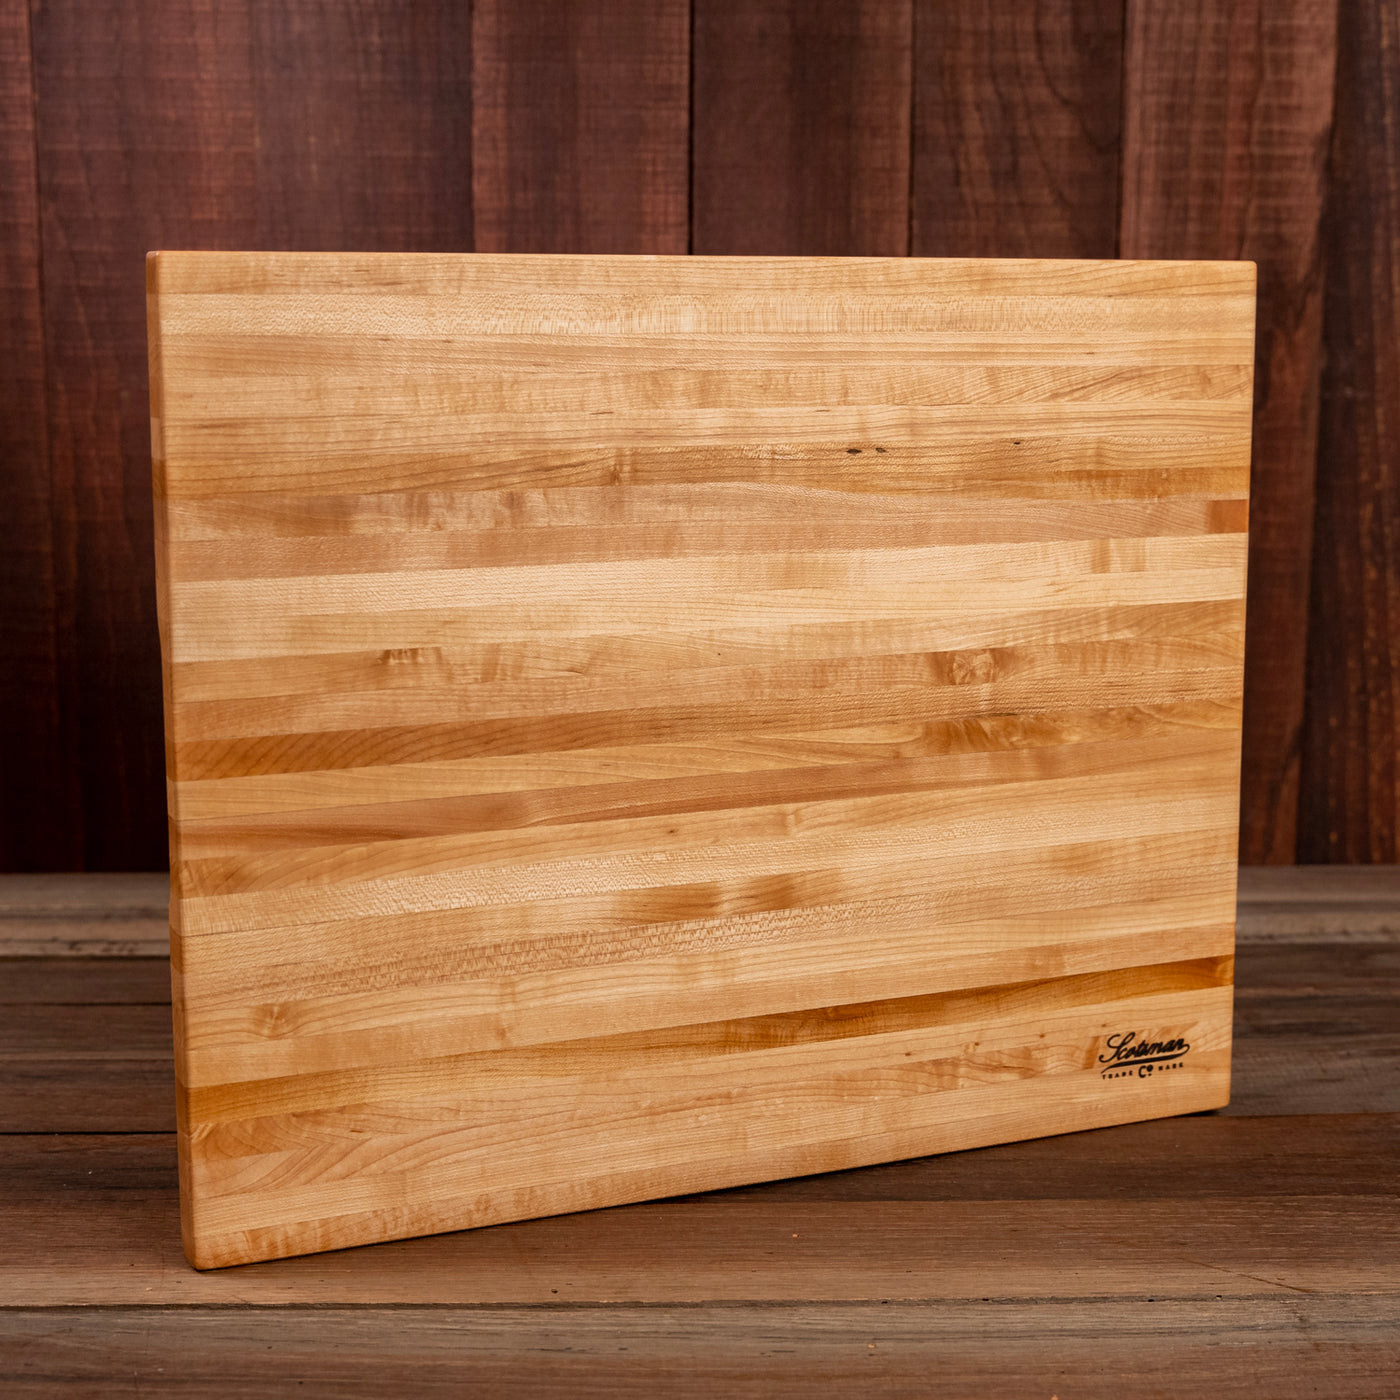 Ole Miss Limited Edition Serving Board